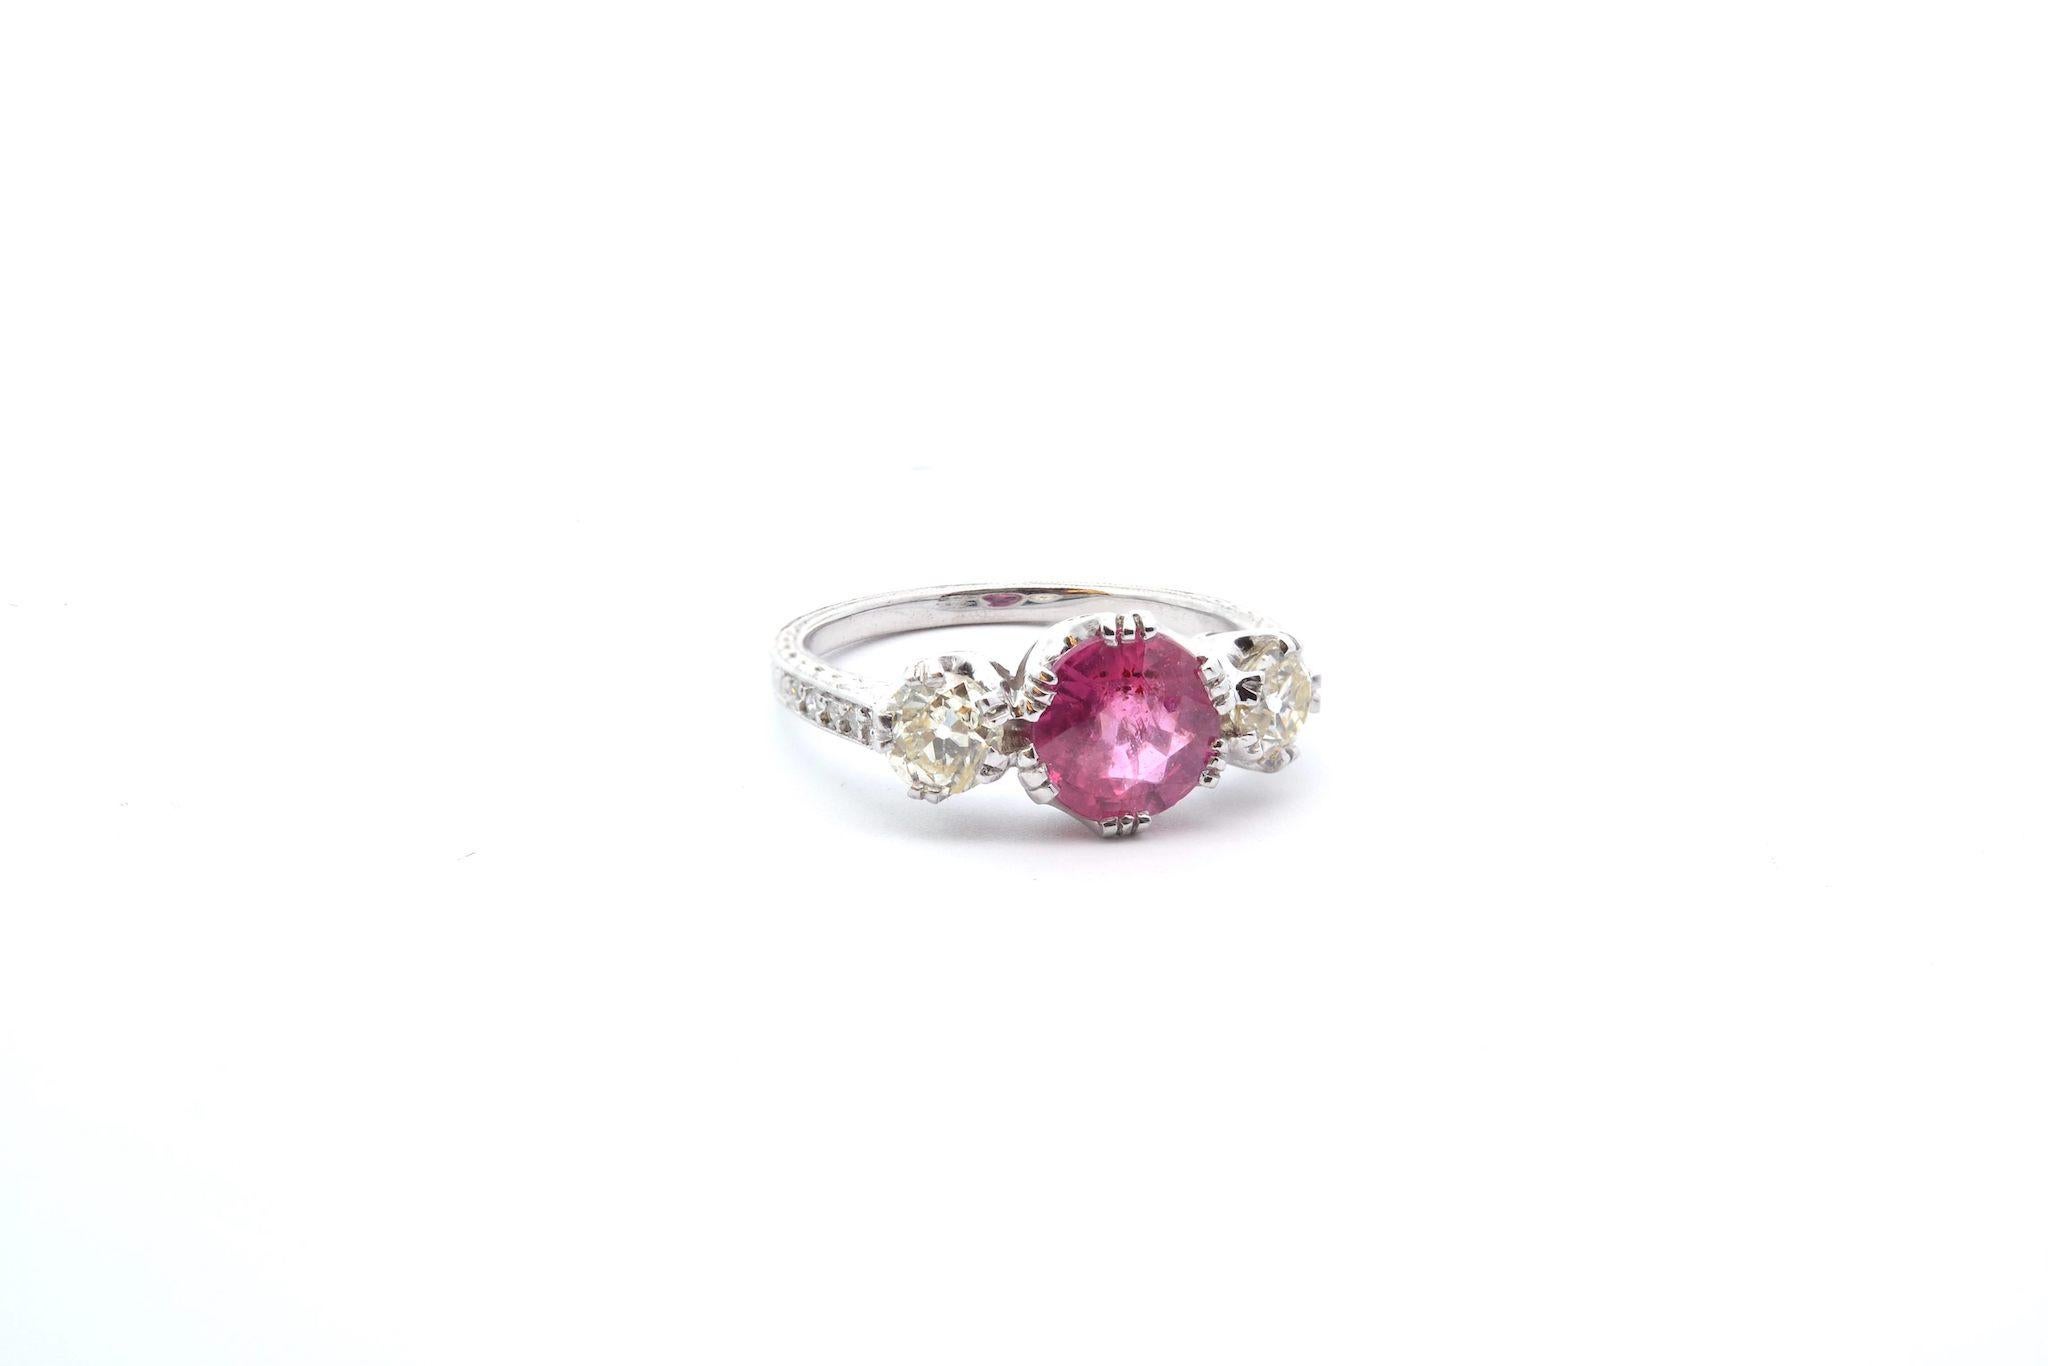 Stones: Pink sapphire of 1.82 cts, 2 diamonds: 0.70ct
Material: Platinum
Weight: 4g
Period: Recent, 1900 style (handmade)
Size: 53 (free sizing)
Certificate
Ref. : 24833-25204